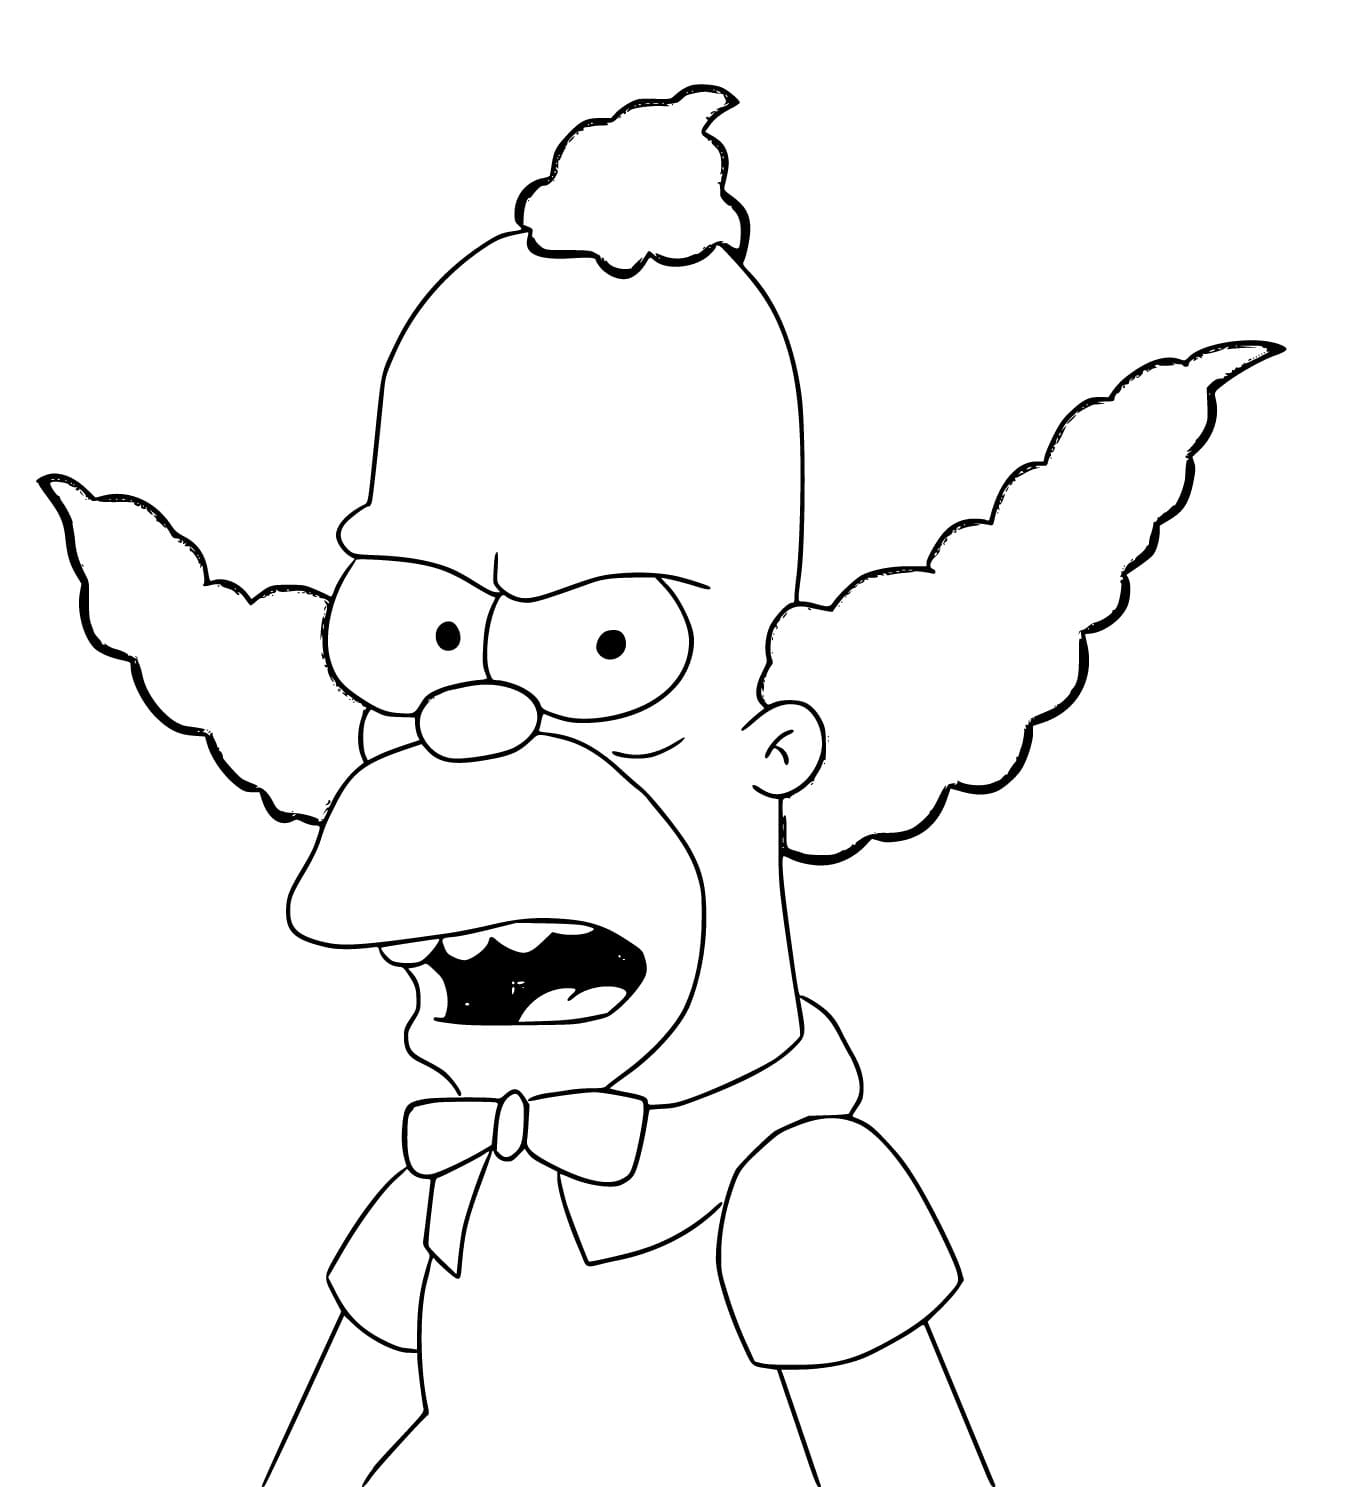 Free Printable Krusty the Clown coloring page - Download, Print or ...